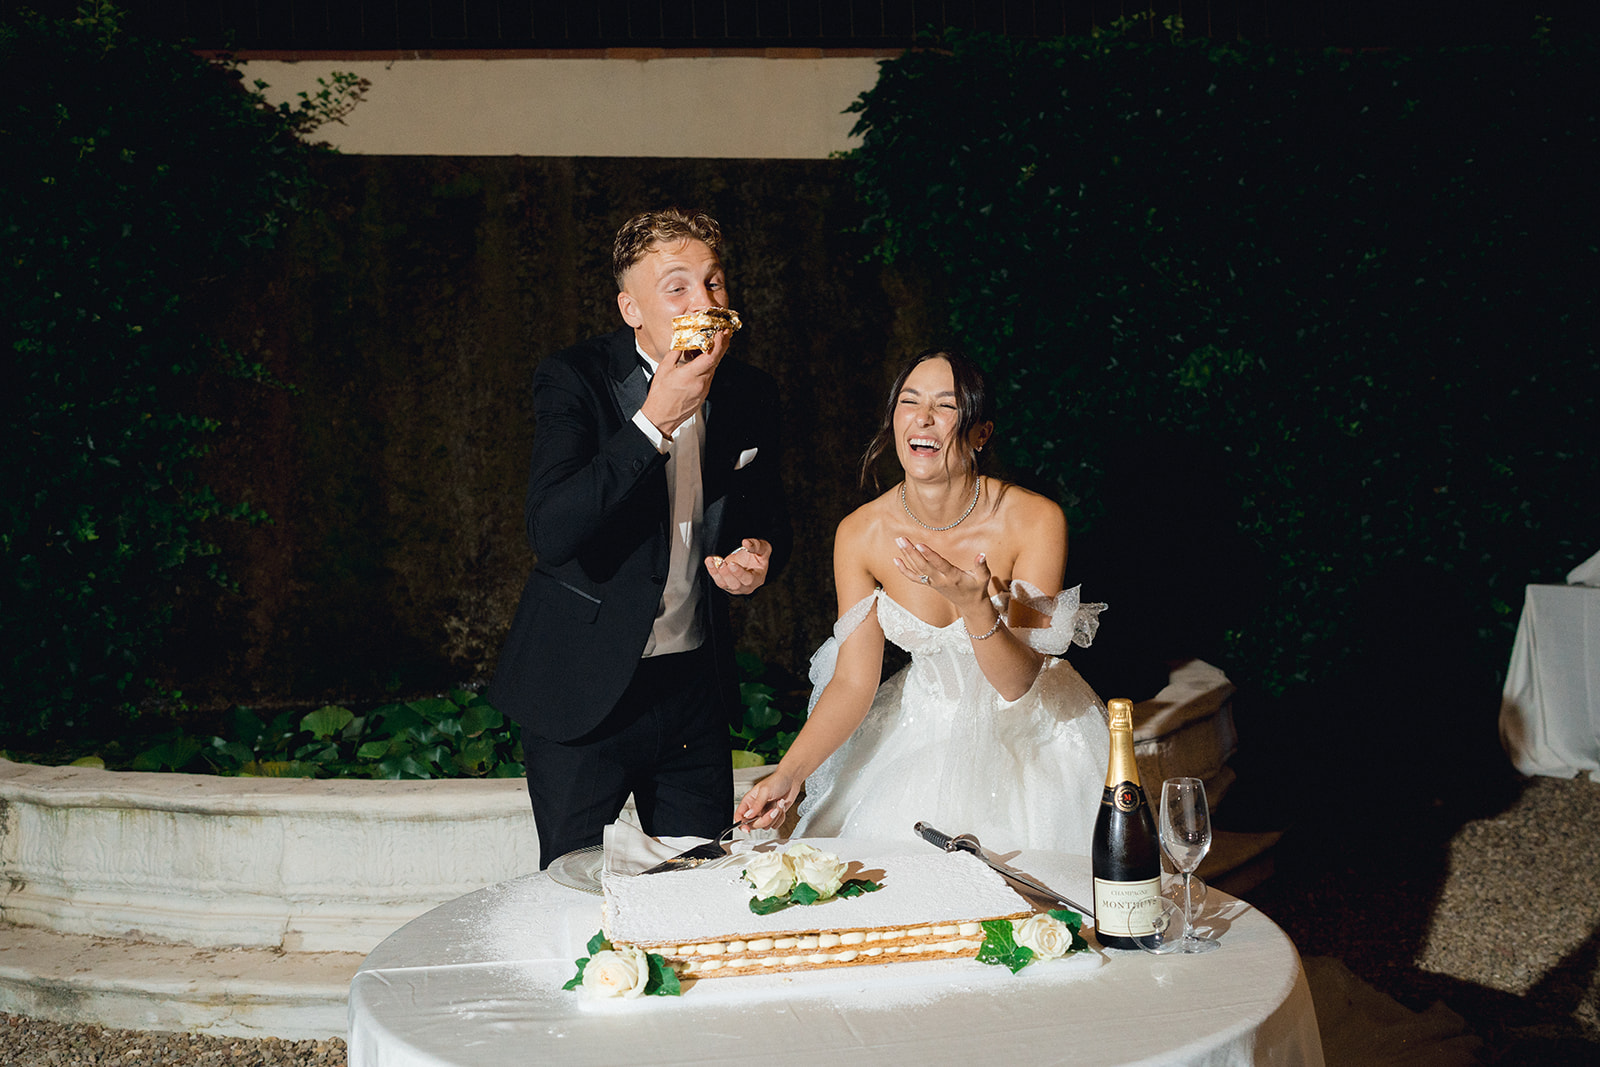 The groom tastes the first slice of cake as the bride laughs with delight